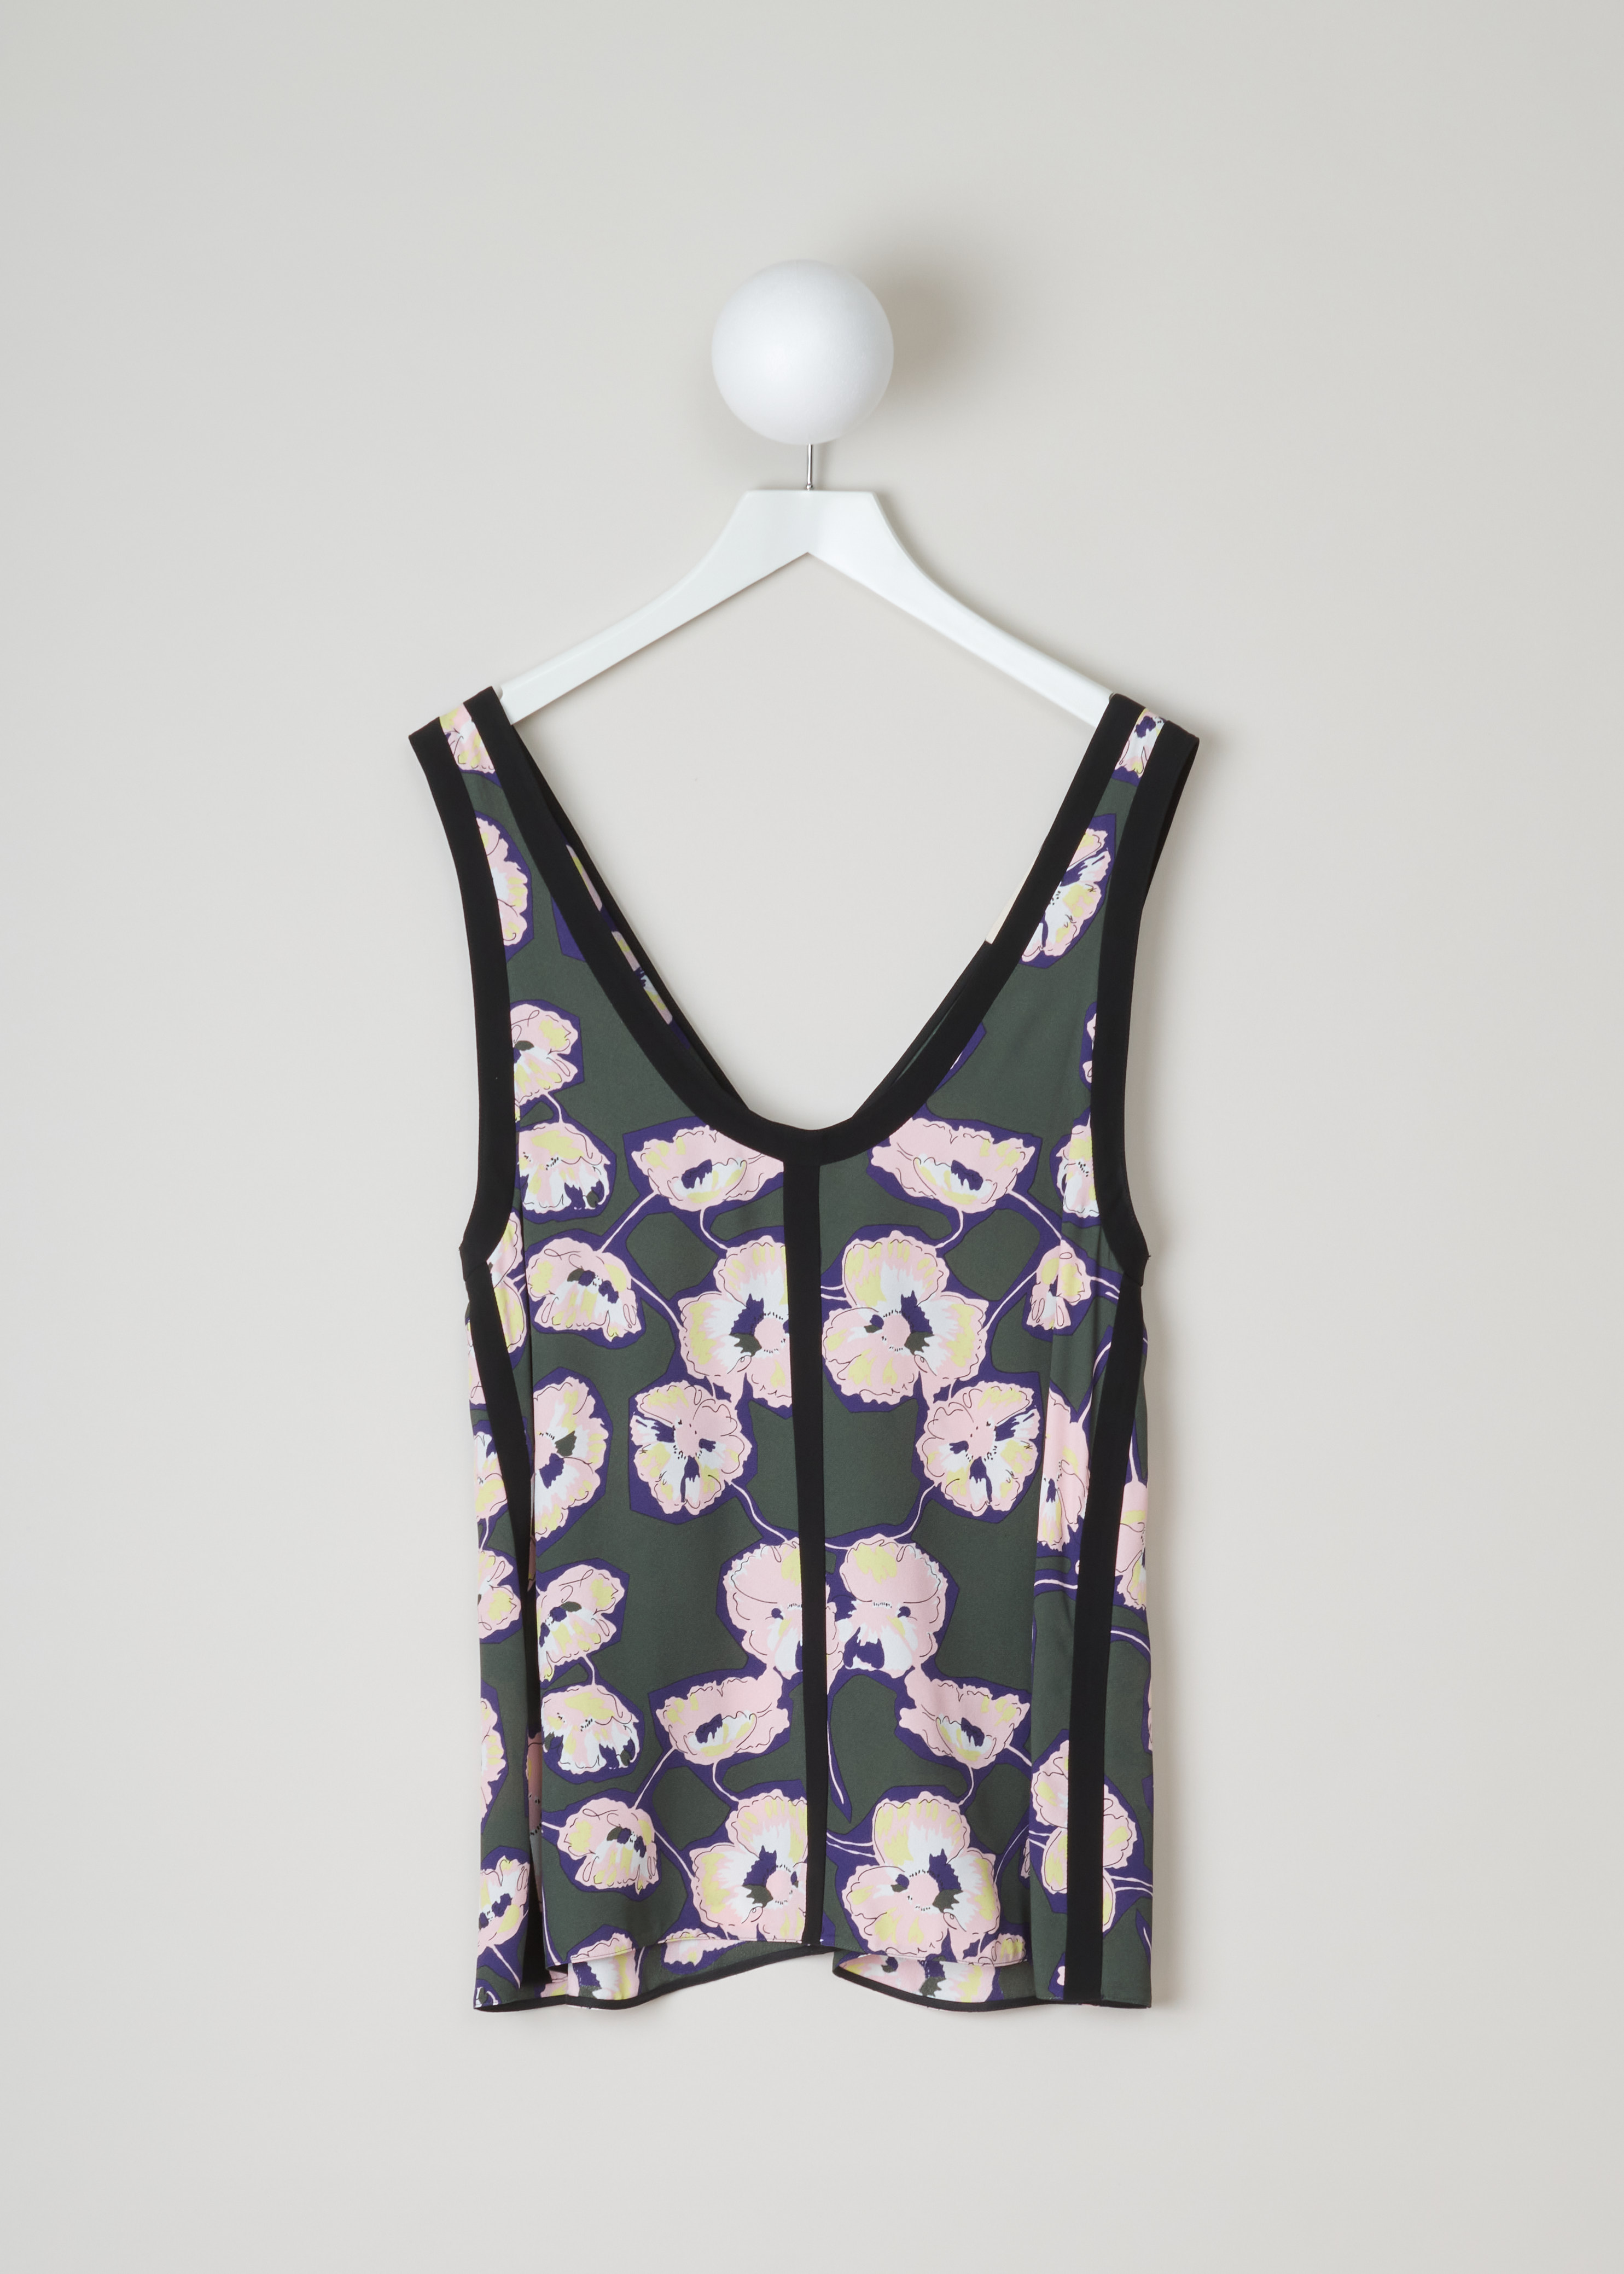 Marni Flower print tank top TTMA_V20Q00_TV526_WHV69 dark olive front. Tank top with a green and purple flower print, deep round neckline, V-back and black decorative bias-binding.